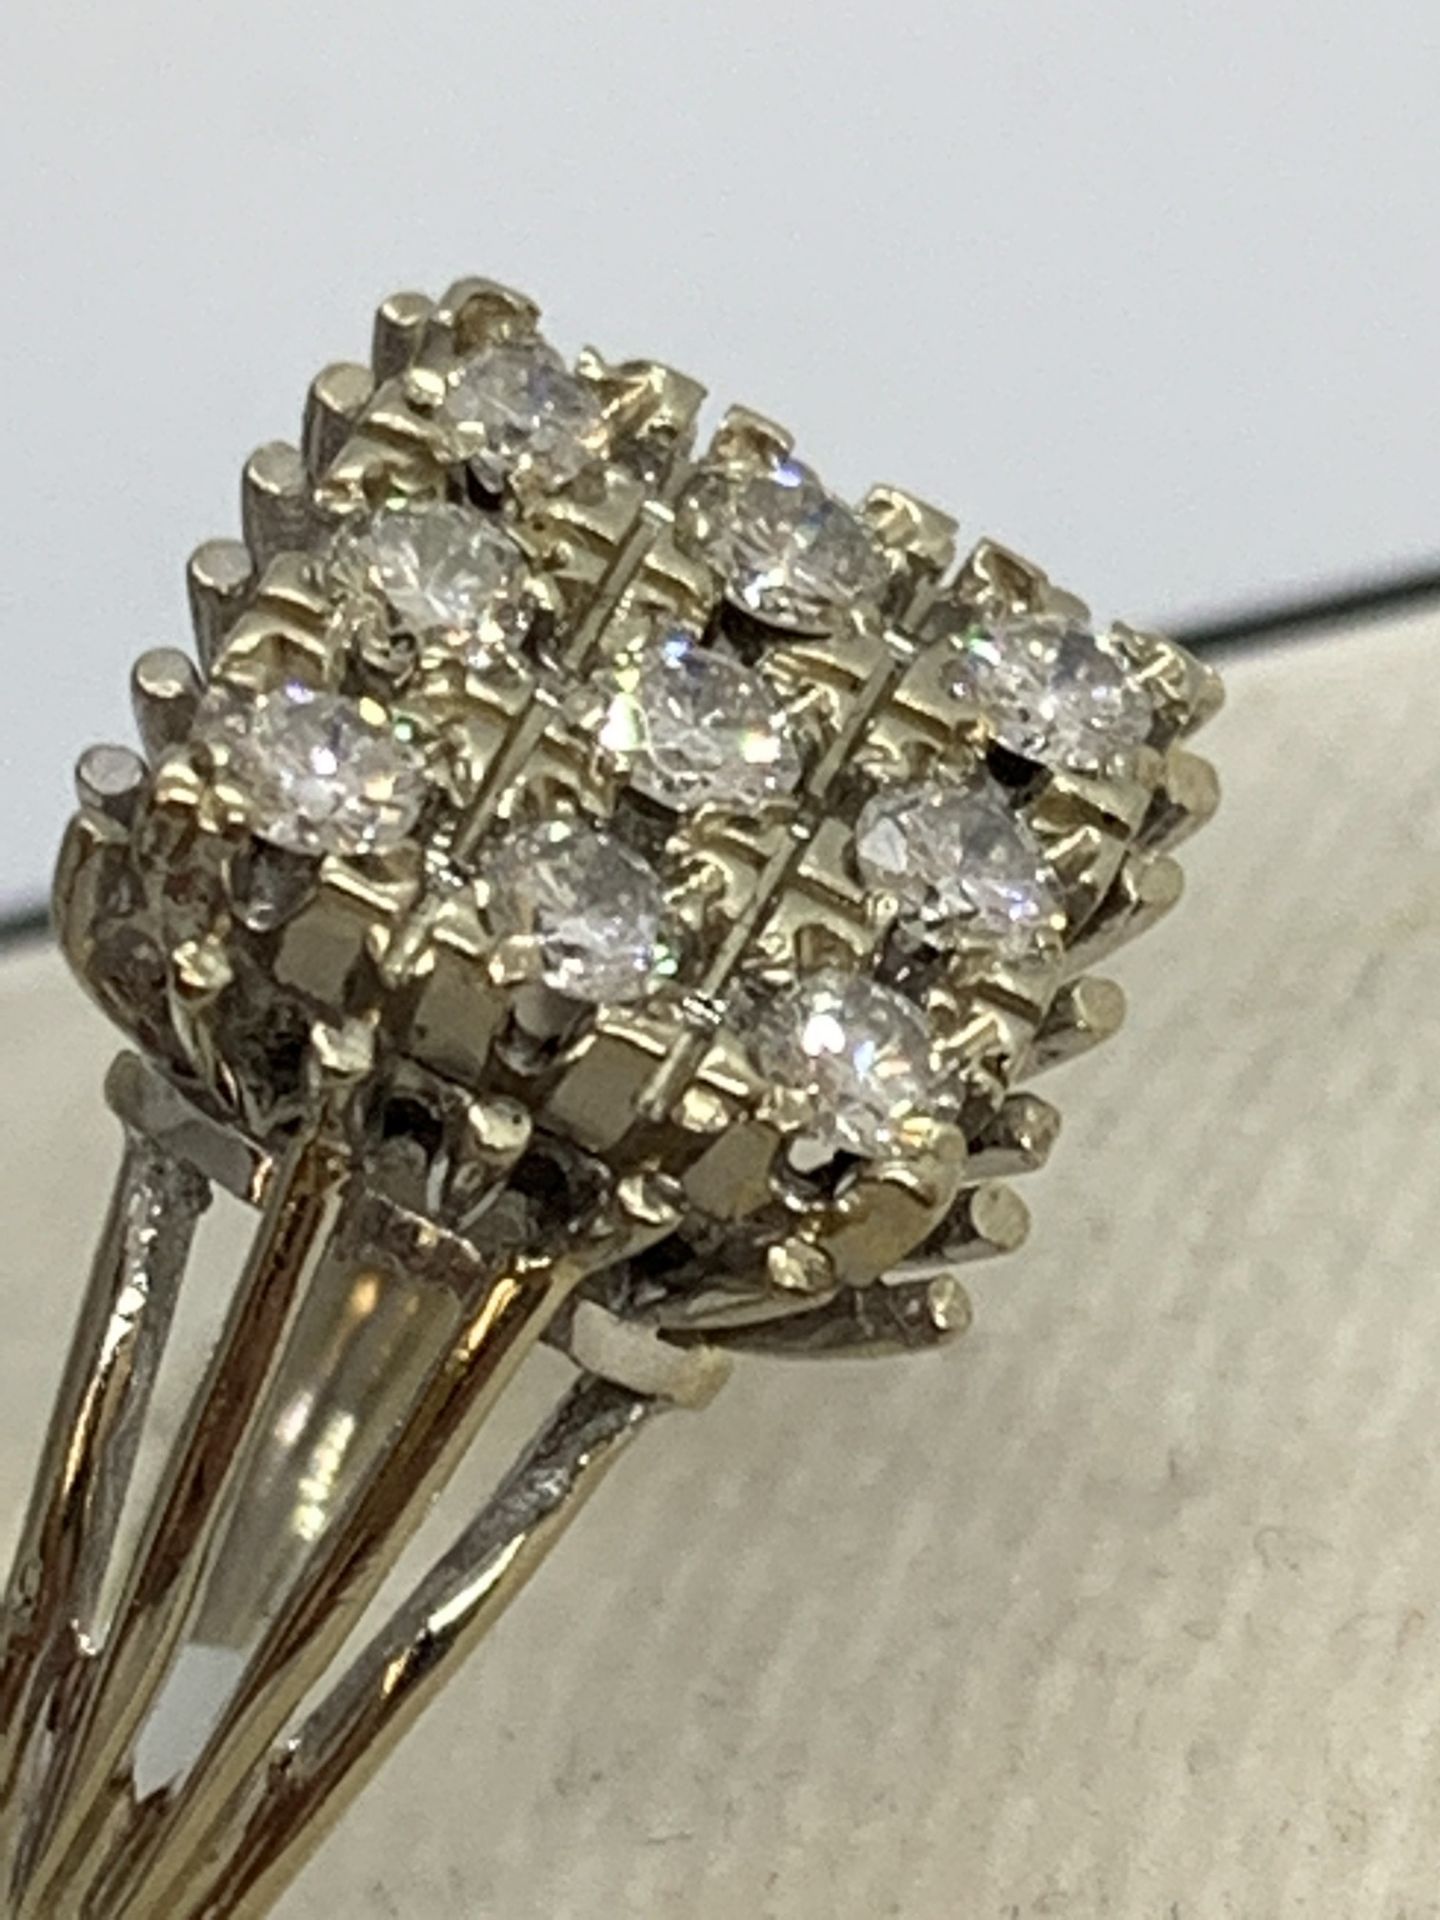 9 x DIAMOND SET RING IN 18ct WHITE/YELLOW GOLD - 6.7g APPROX - SIZE M APPROX - Image 2 of 6